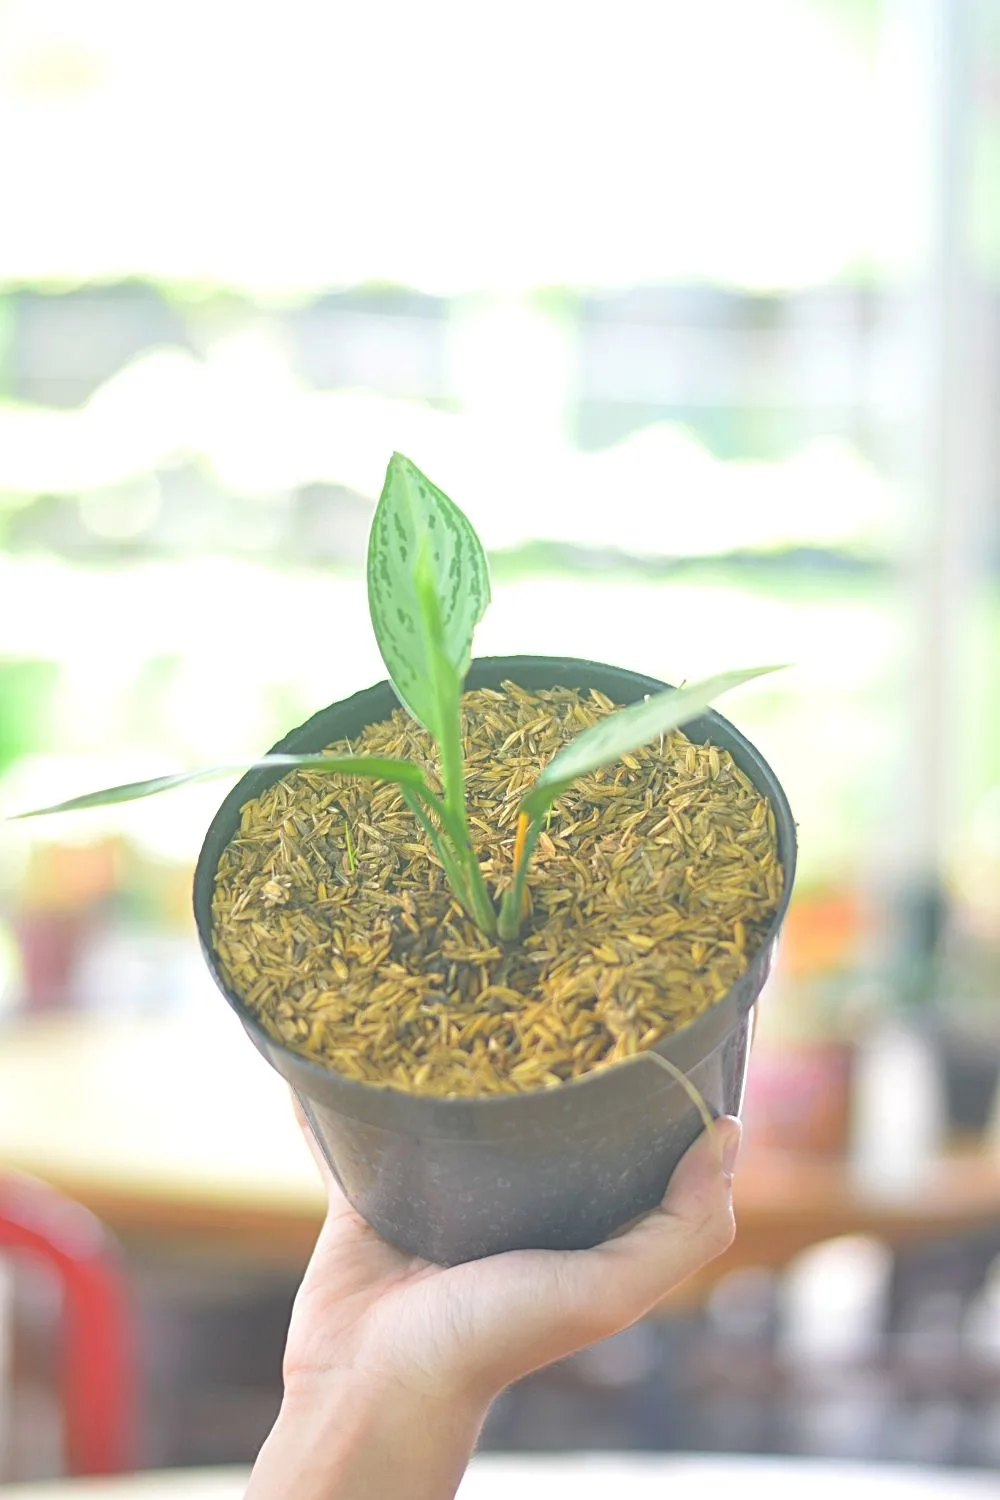 The mutation process for the Philodendron Birkin starts from its growing tip